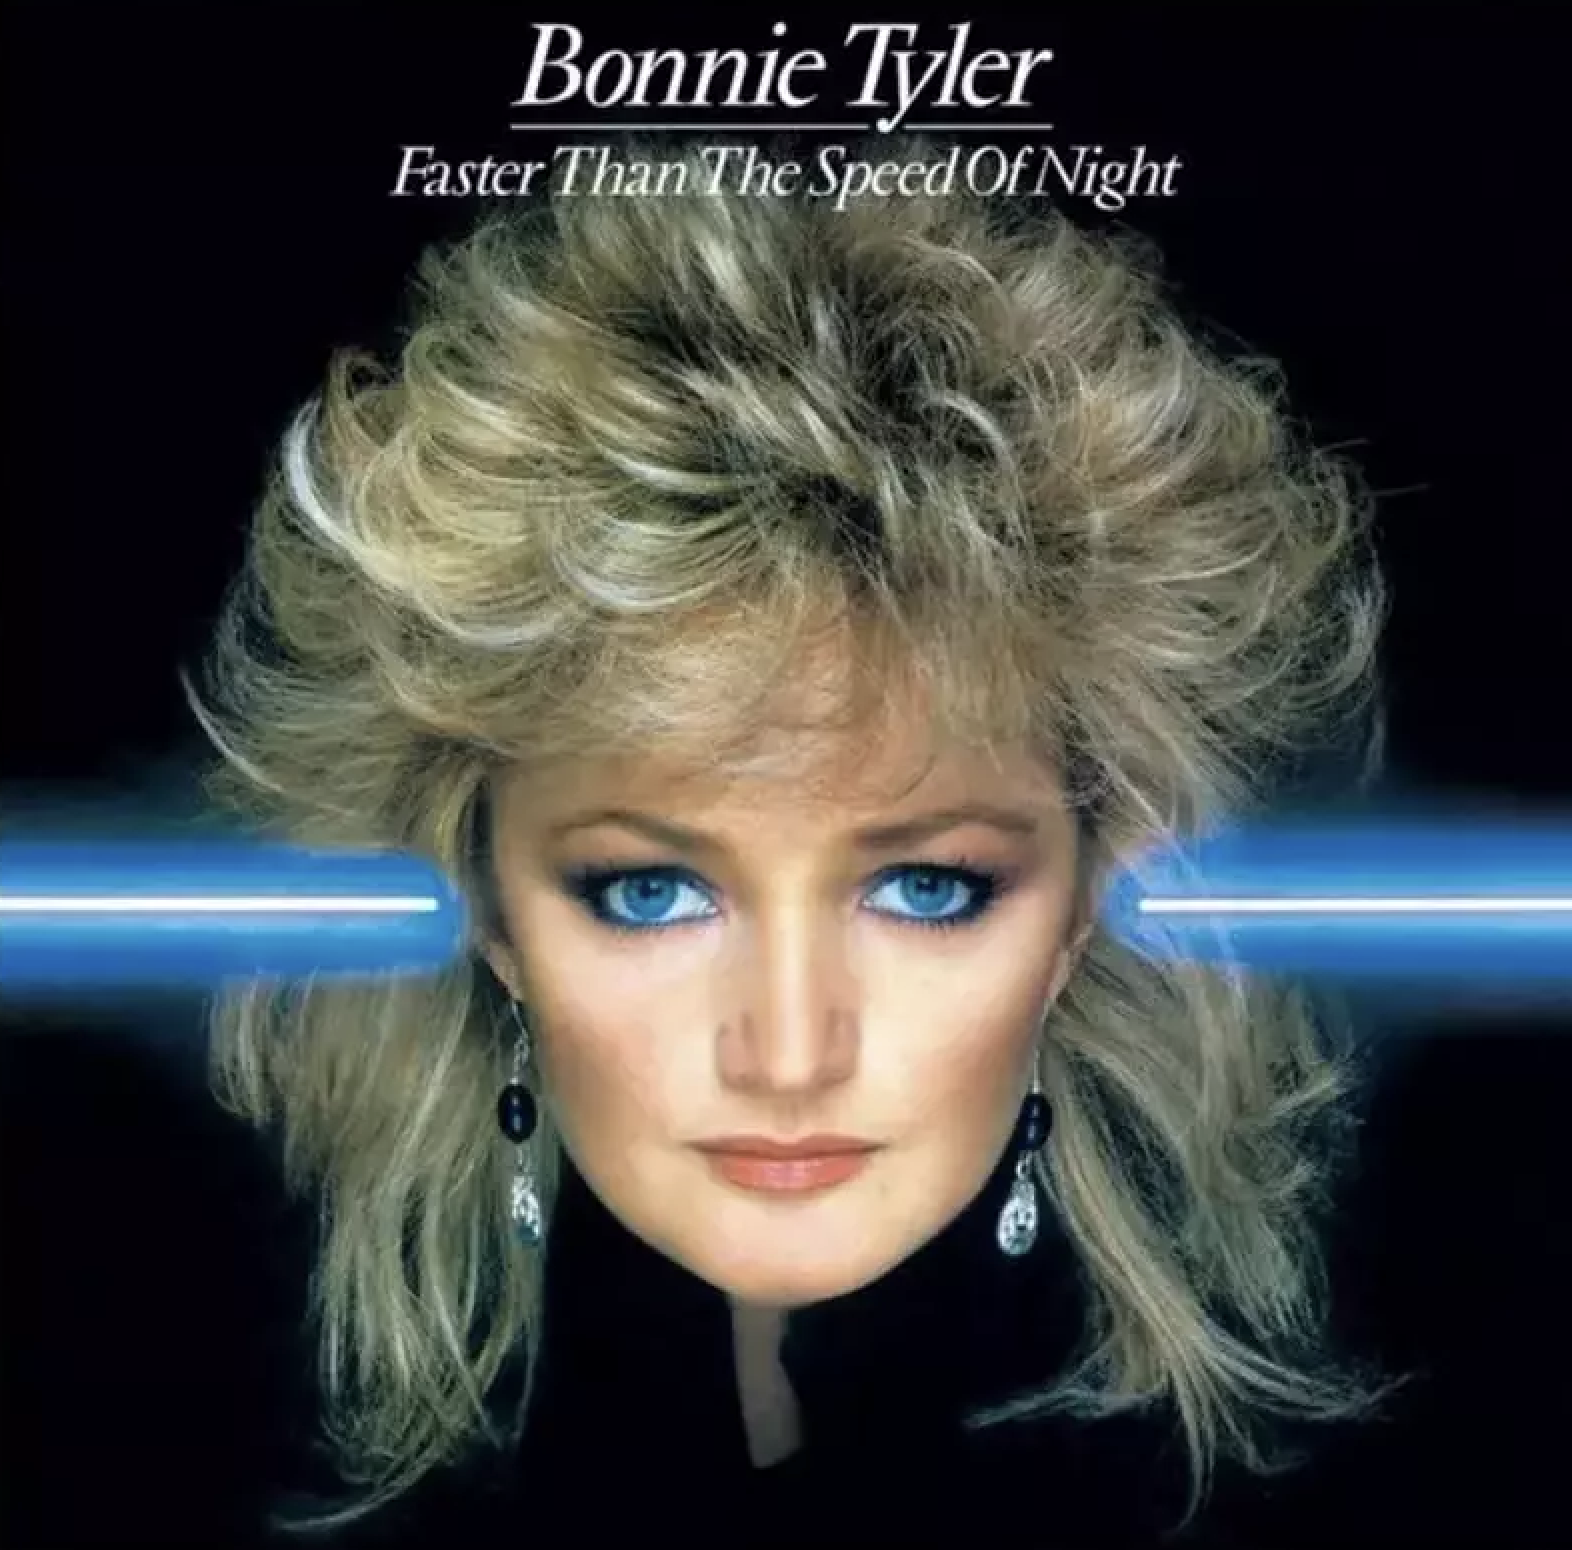 BONNIE TYLER - FASTER THAN THE SPEED OF NIGHT - LP